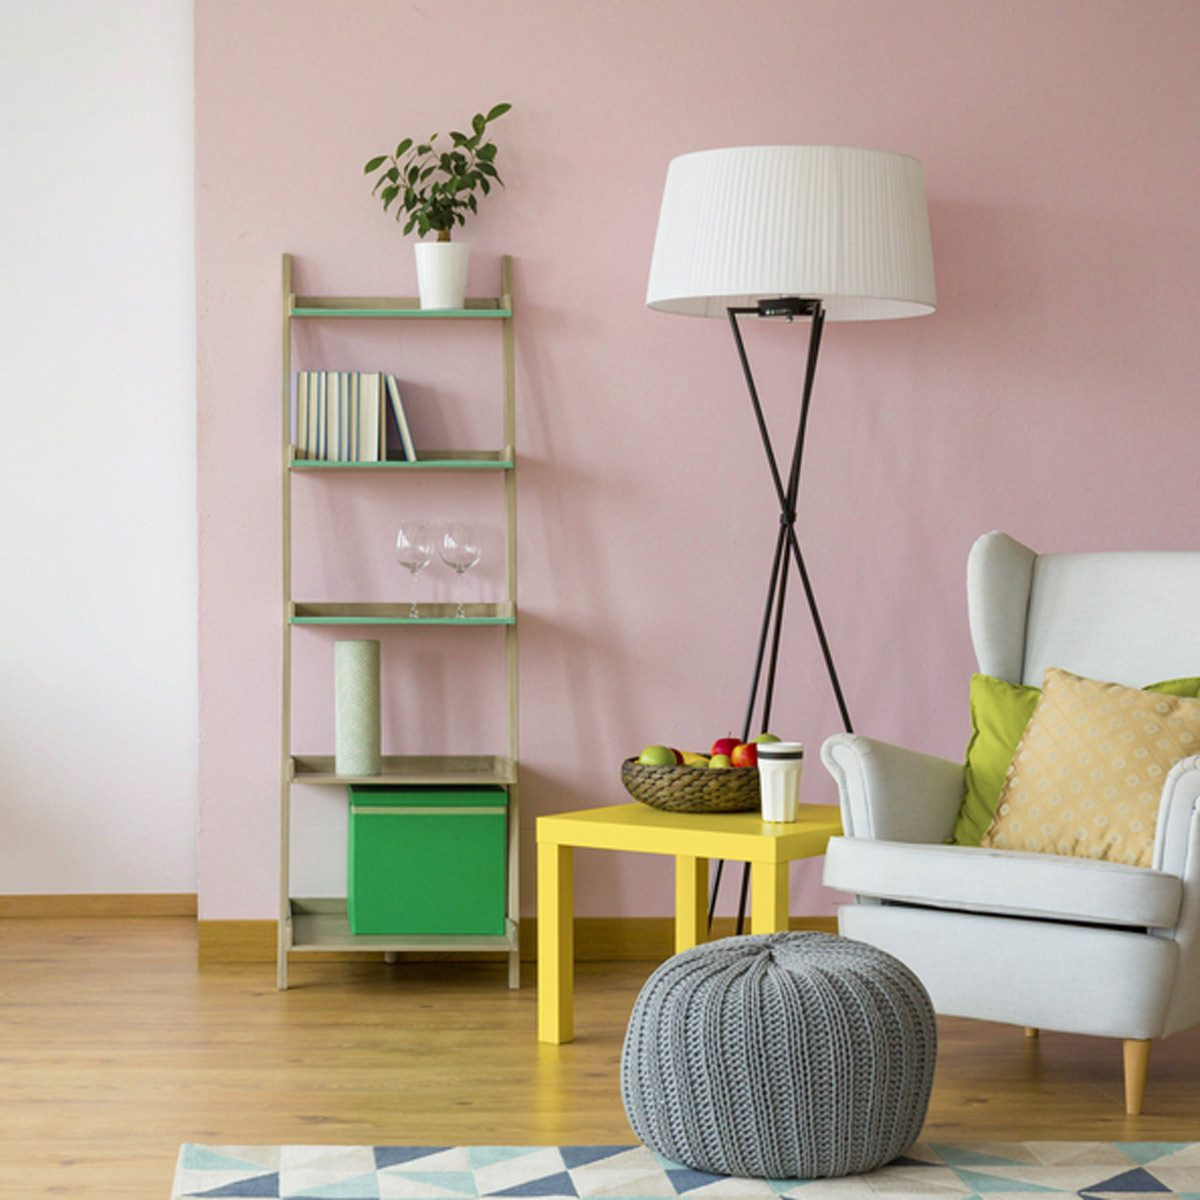 Living Room Painting Ideas
 13 Great Paint Ideas for Your Living Room — The Family